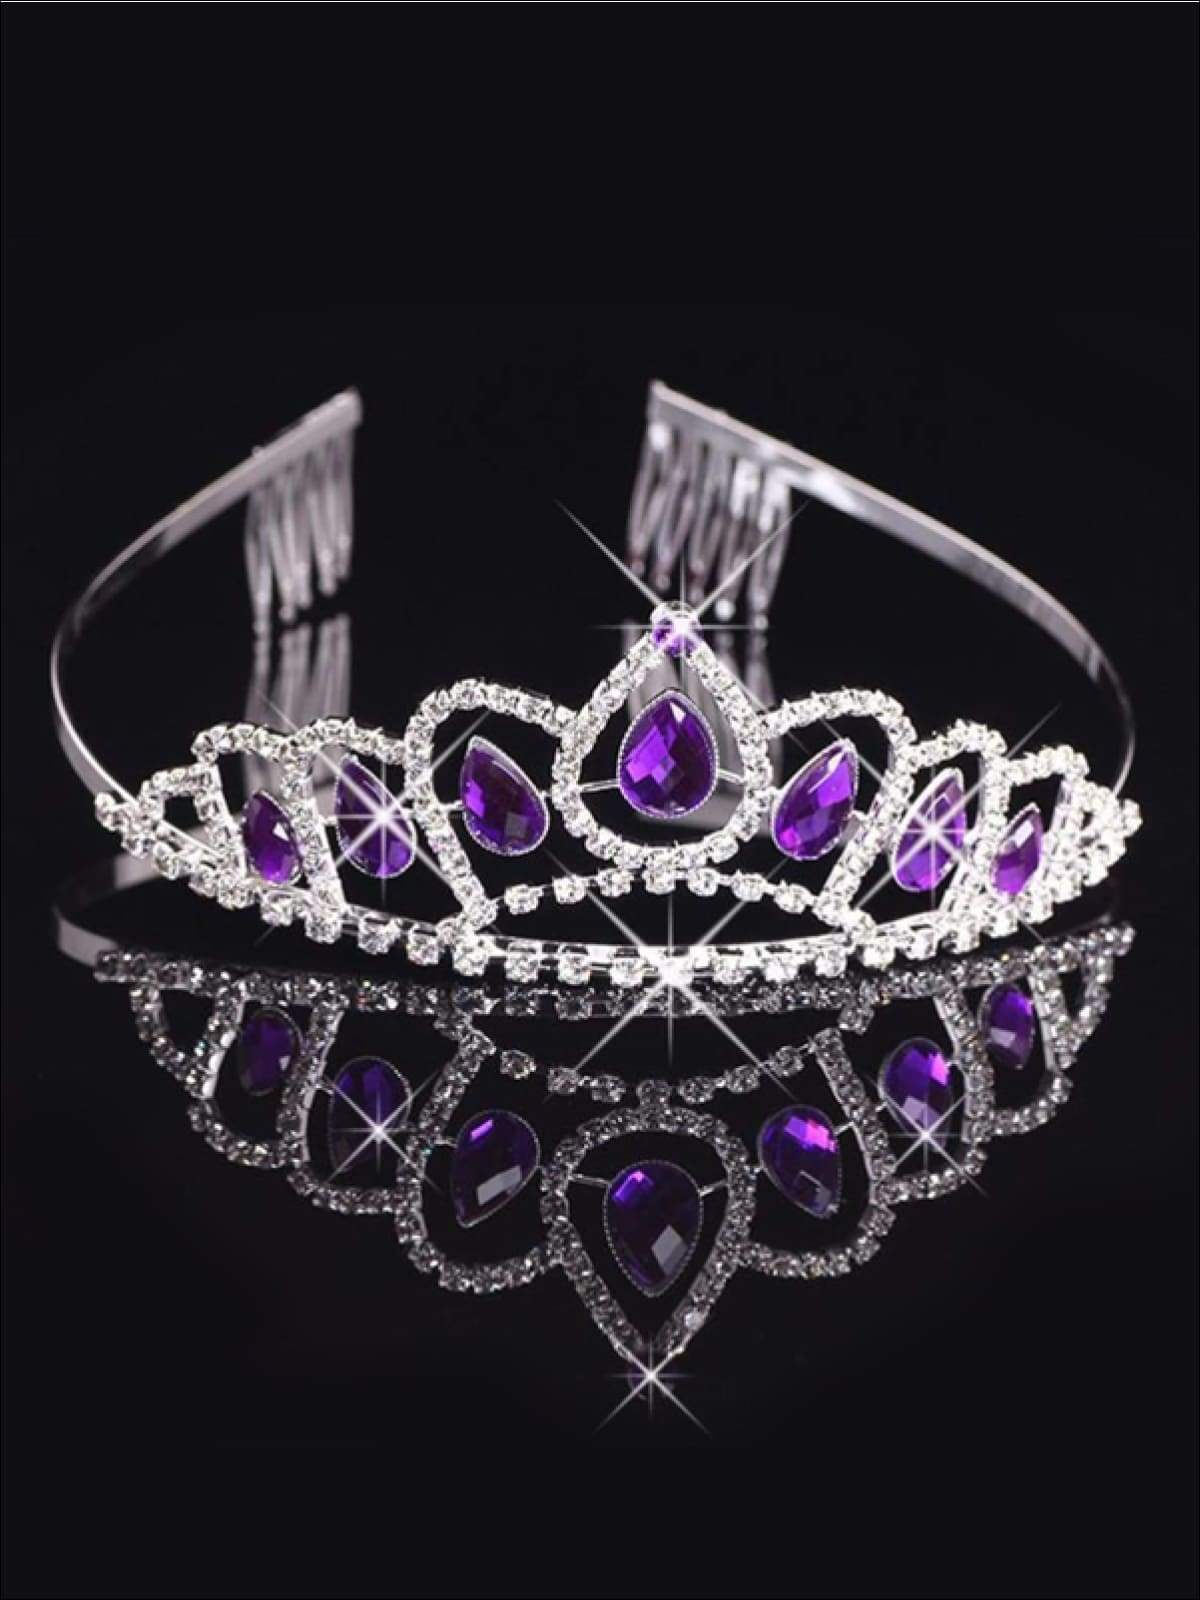 Halloween Accessories | Sofia The First Inspired Tiara | Mia Belle Girls